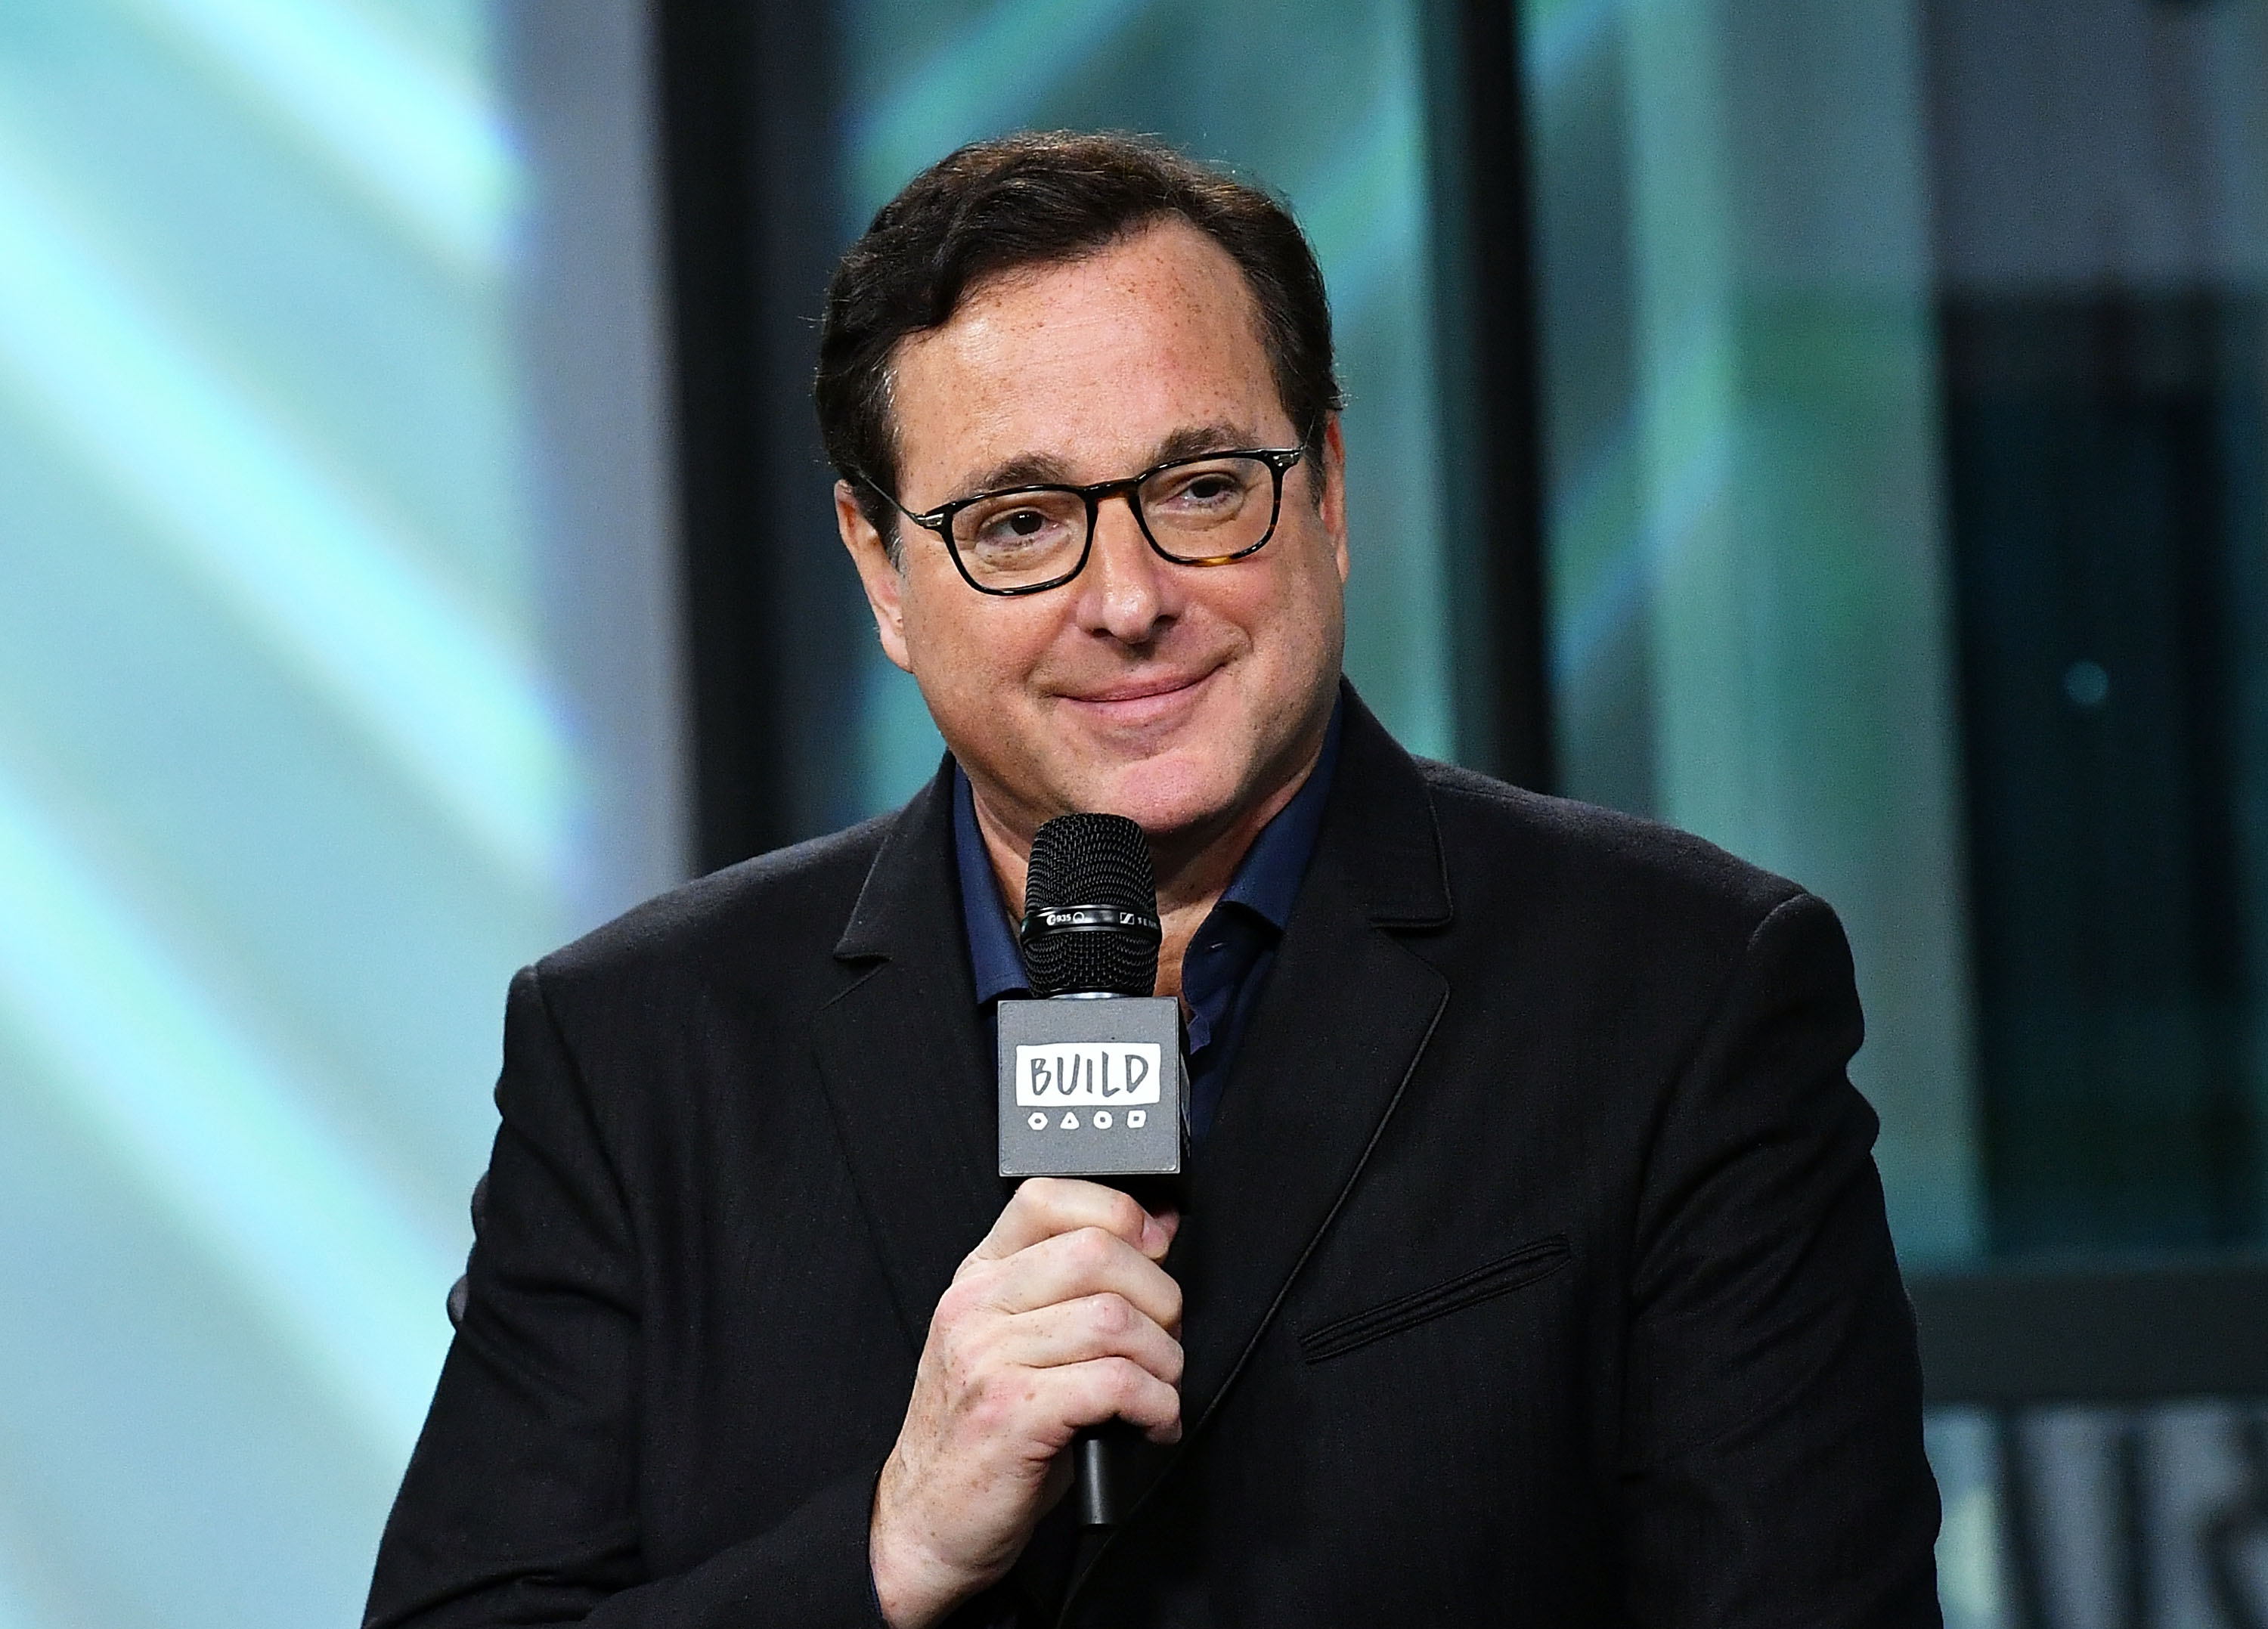 Bob Saget visits Build to chat about the new season of "Fuller House" at Build Studio on September 18, 2017. | Photo: GettyImages